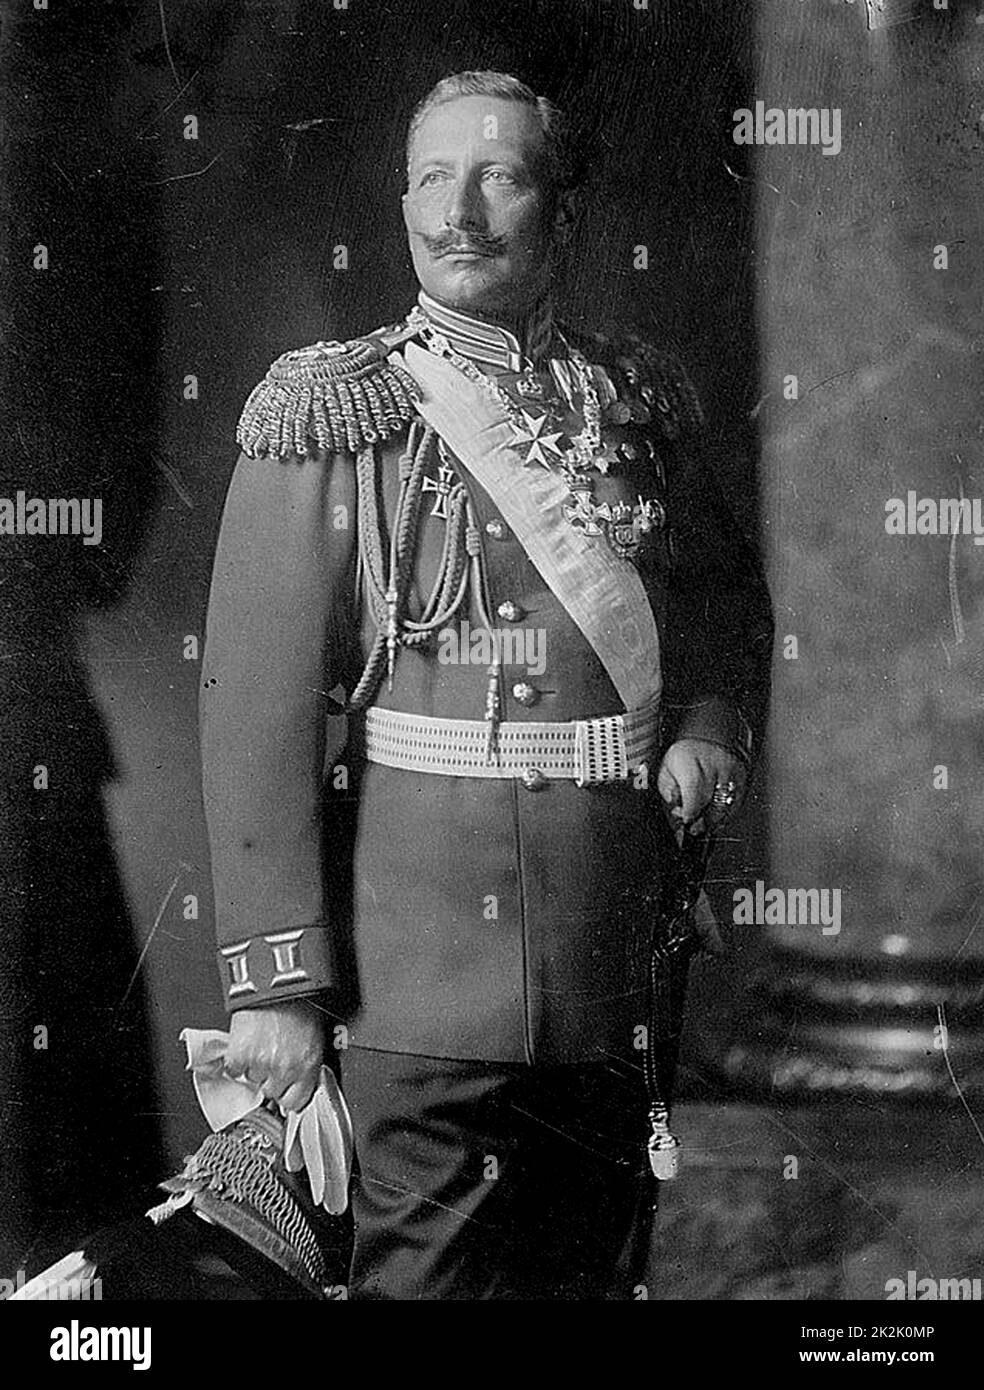 Wilhelm II (1859-1941) Emperor of Germany 1888-1918. Three-quarter length image of Wilhelm (William) in military uniform, hand on sword hilt disguising his hand injured at birth and affected by Erb's Palsy. Medicine Orthopaedics Stock Photo